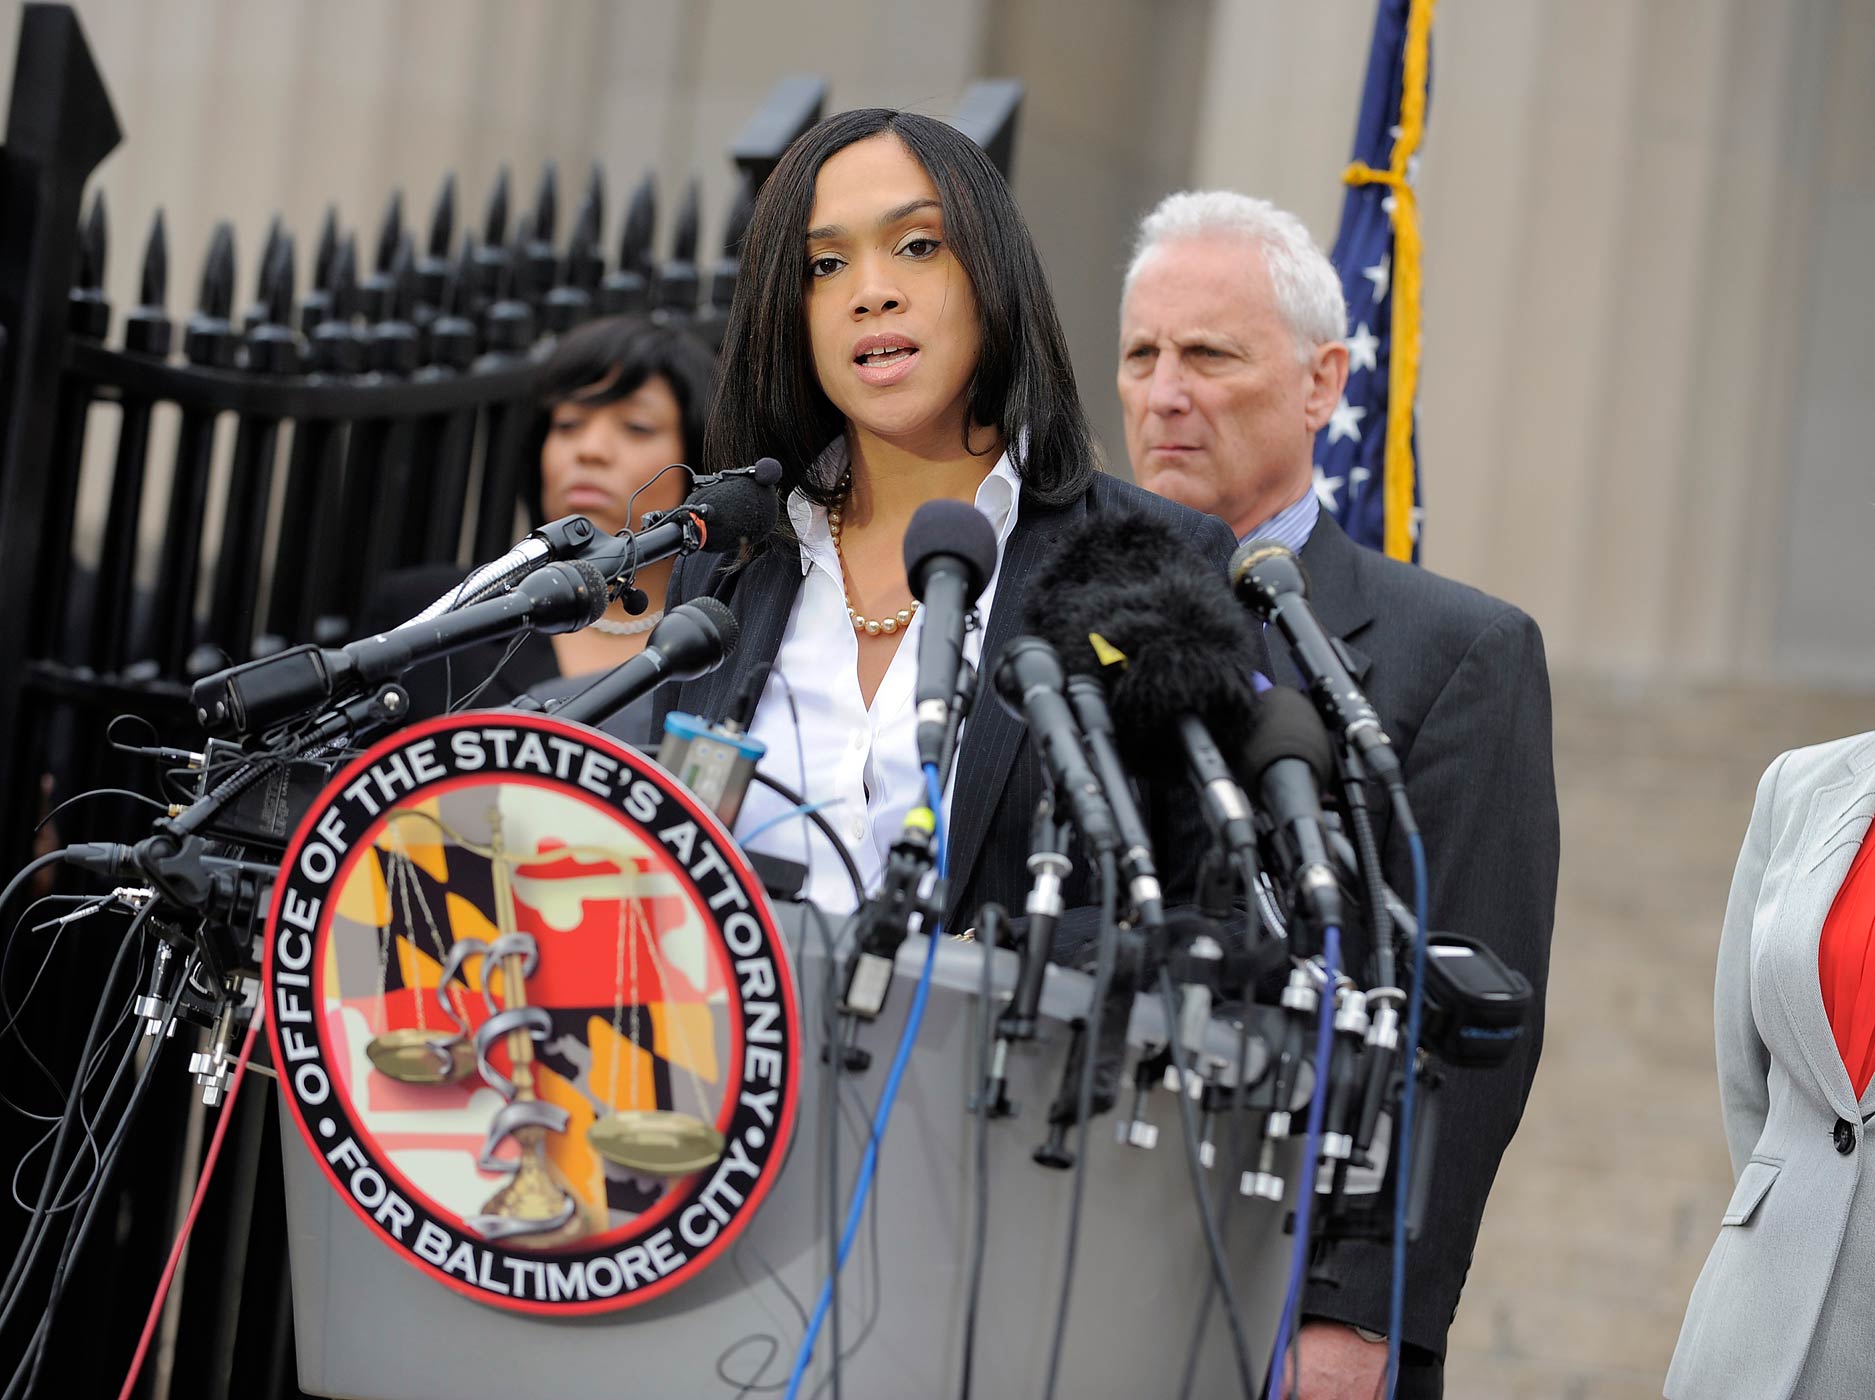 Baltimore State Attorney Marilyn Mosby answers questions at a press conference outside the War Memorial Building on May 1, 2015, talking about the arrests of police officers involved in the death of Freddie Gray in Baltimore, Md. (Lloyd Fox—Baltimore Sun/TNS/Getty Images)